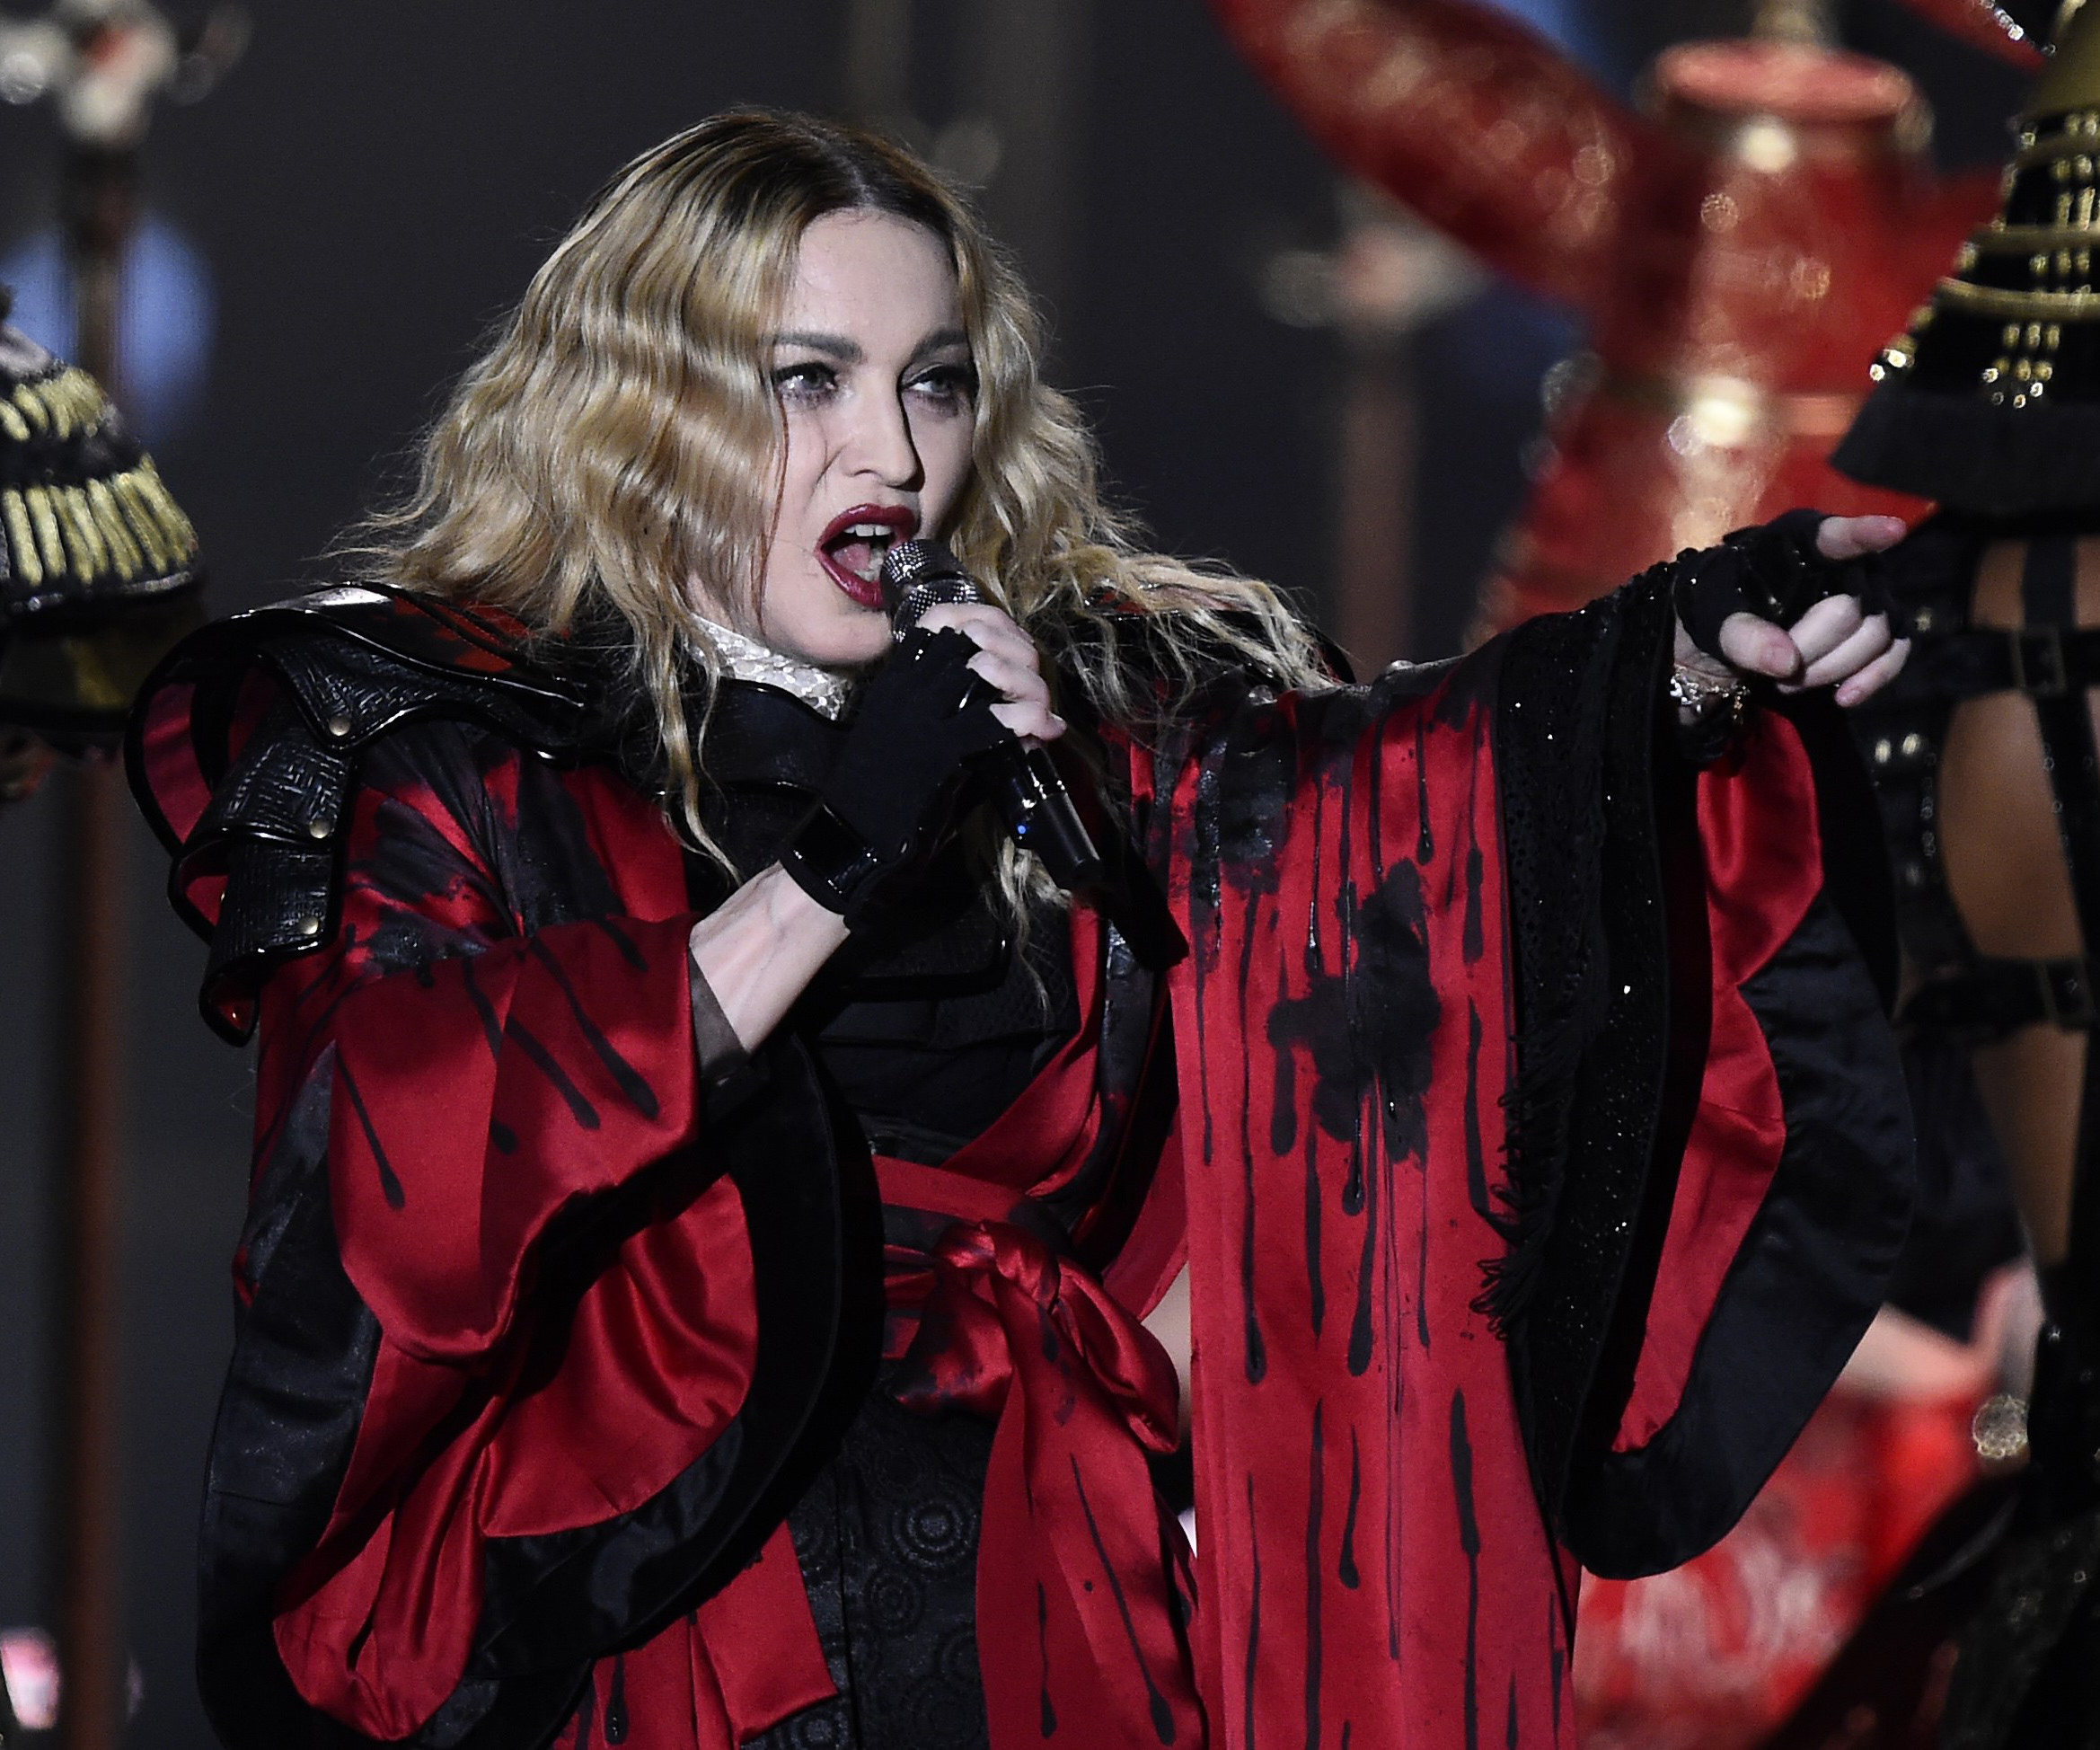 Madonna arrived “drunk” and three hours late to concert